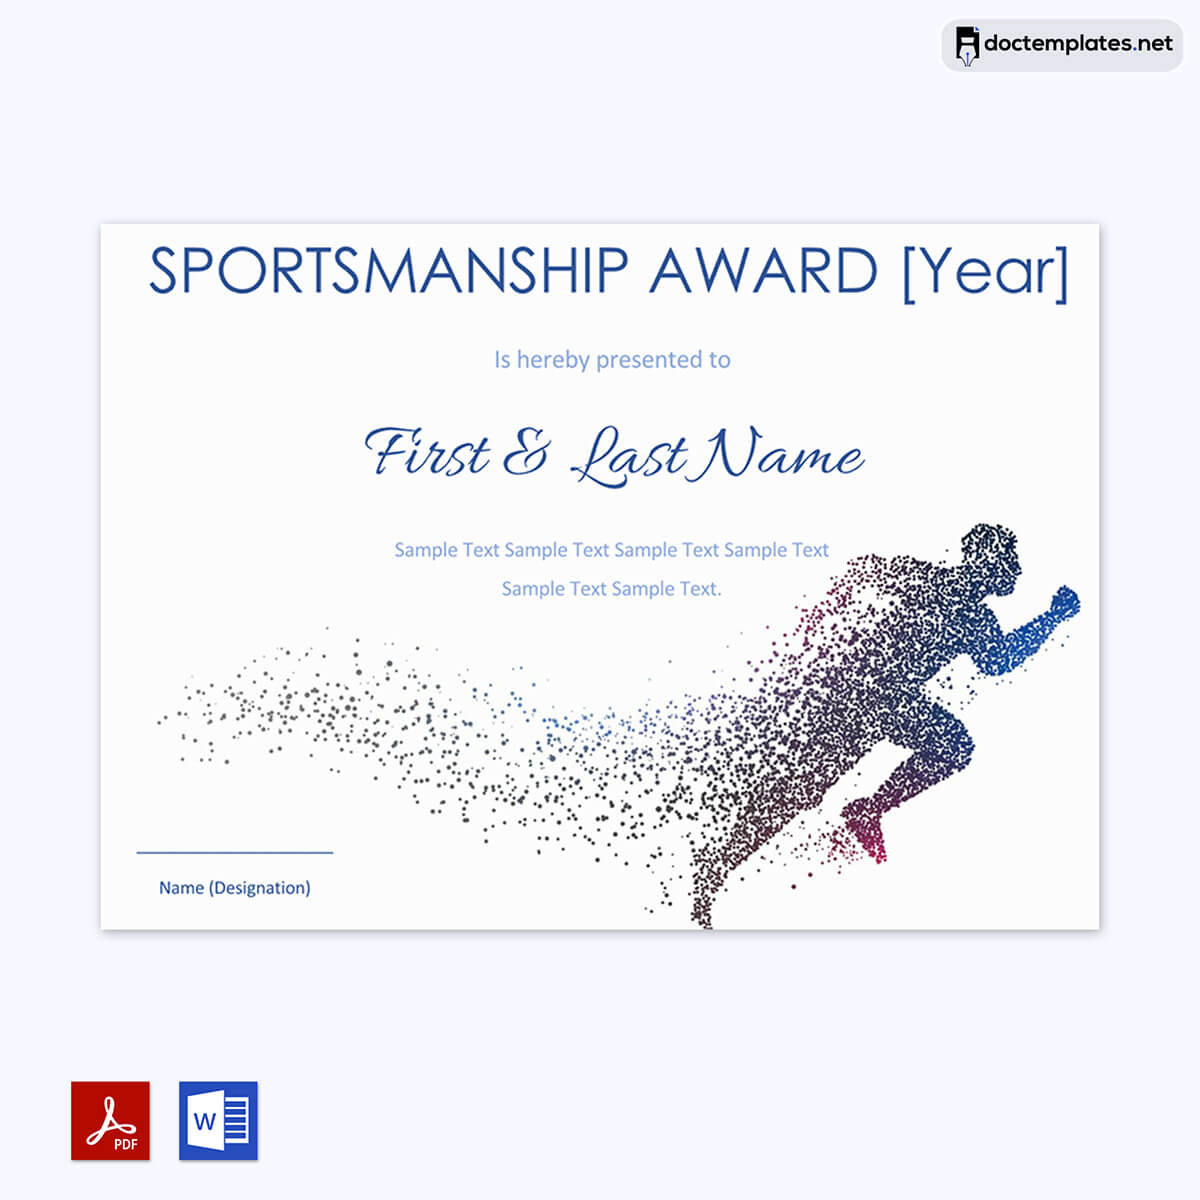 Image of Certificate for sports winner
Certificate for sports winner
